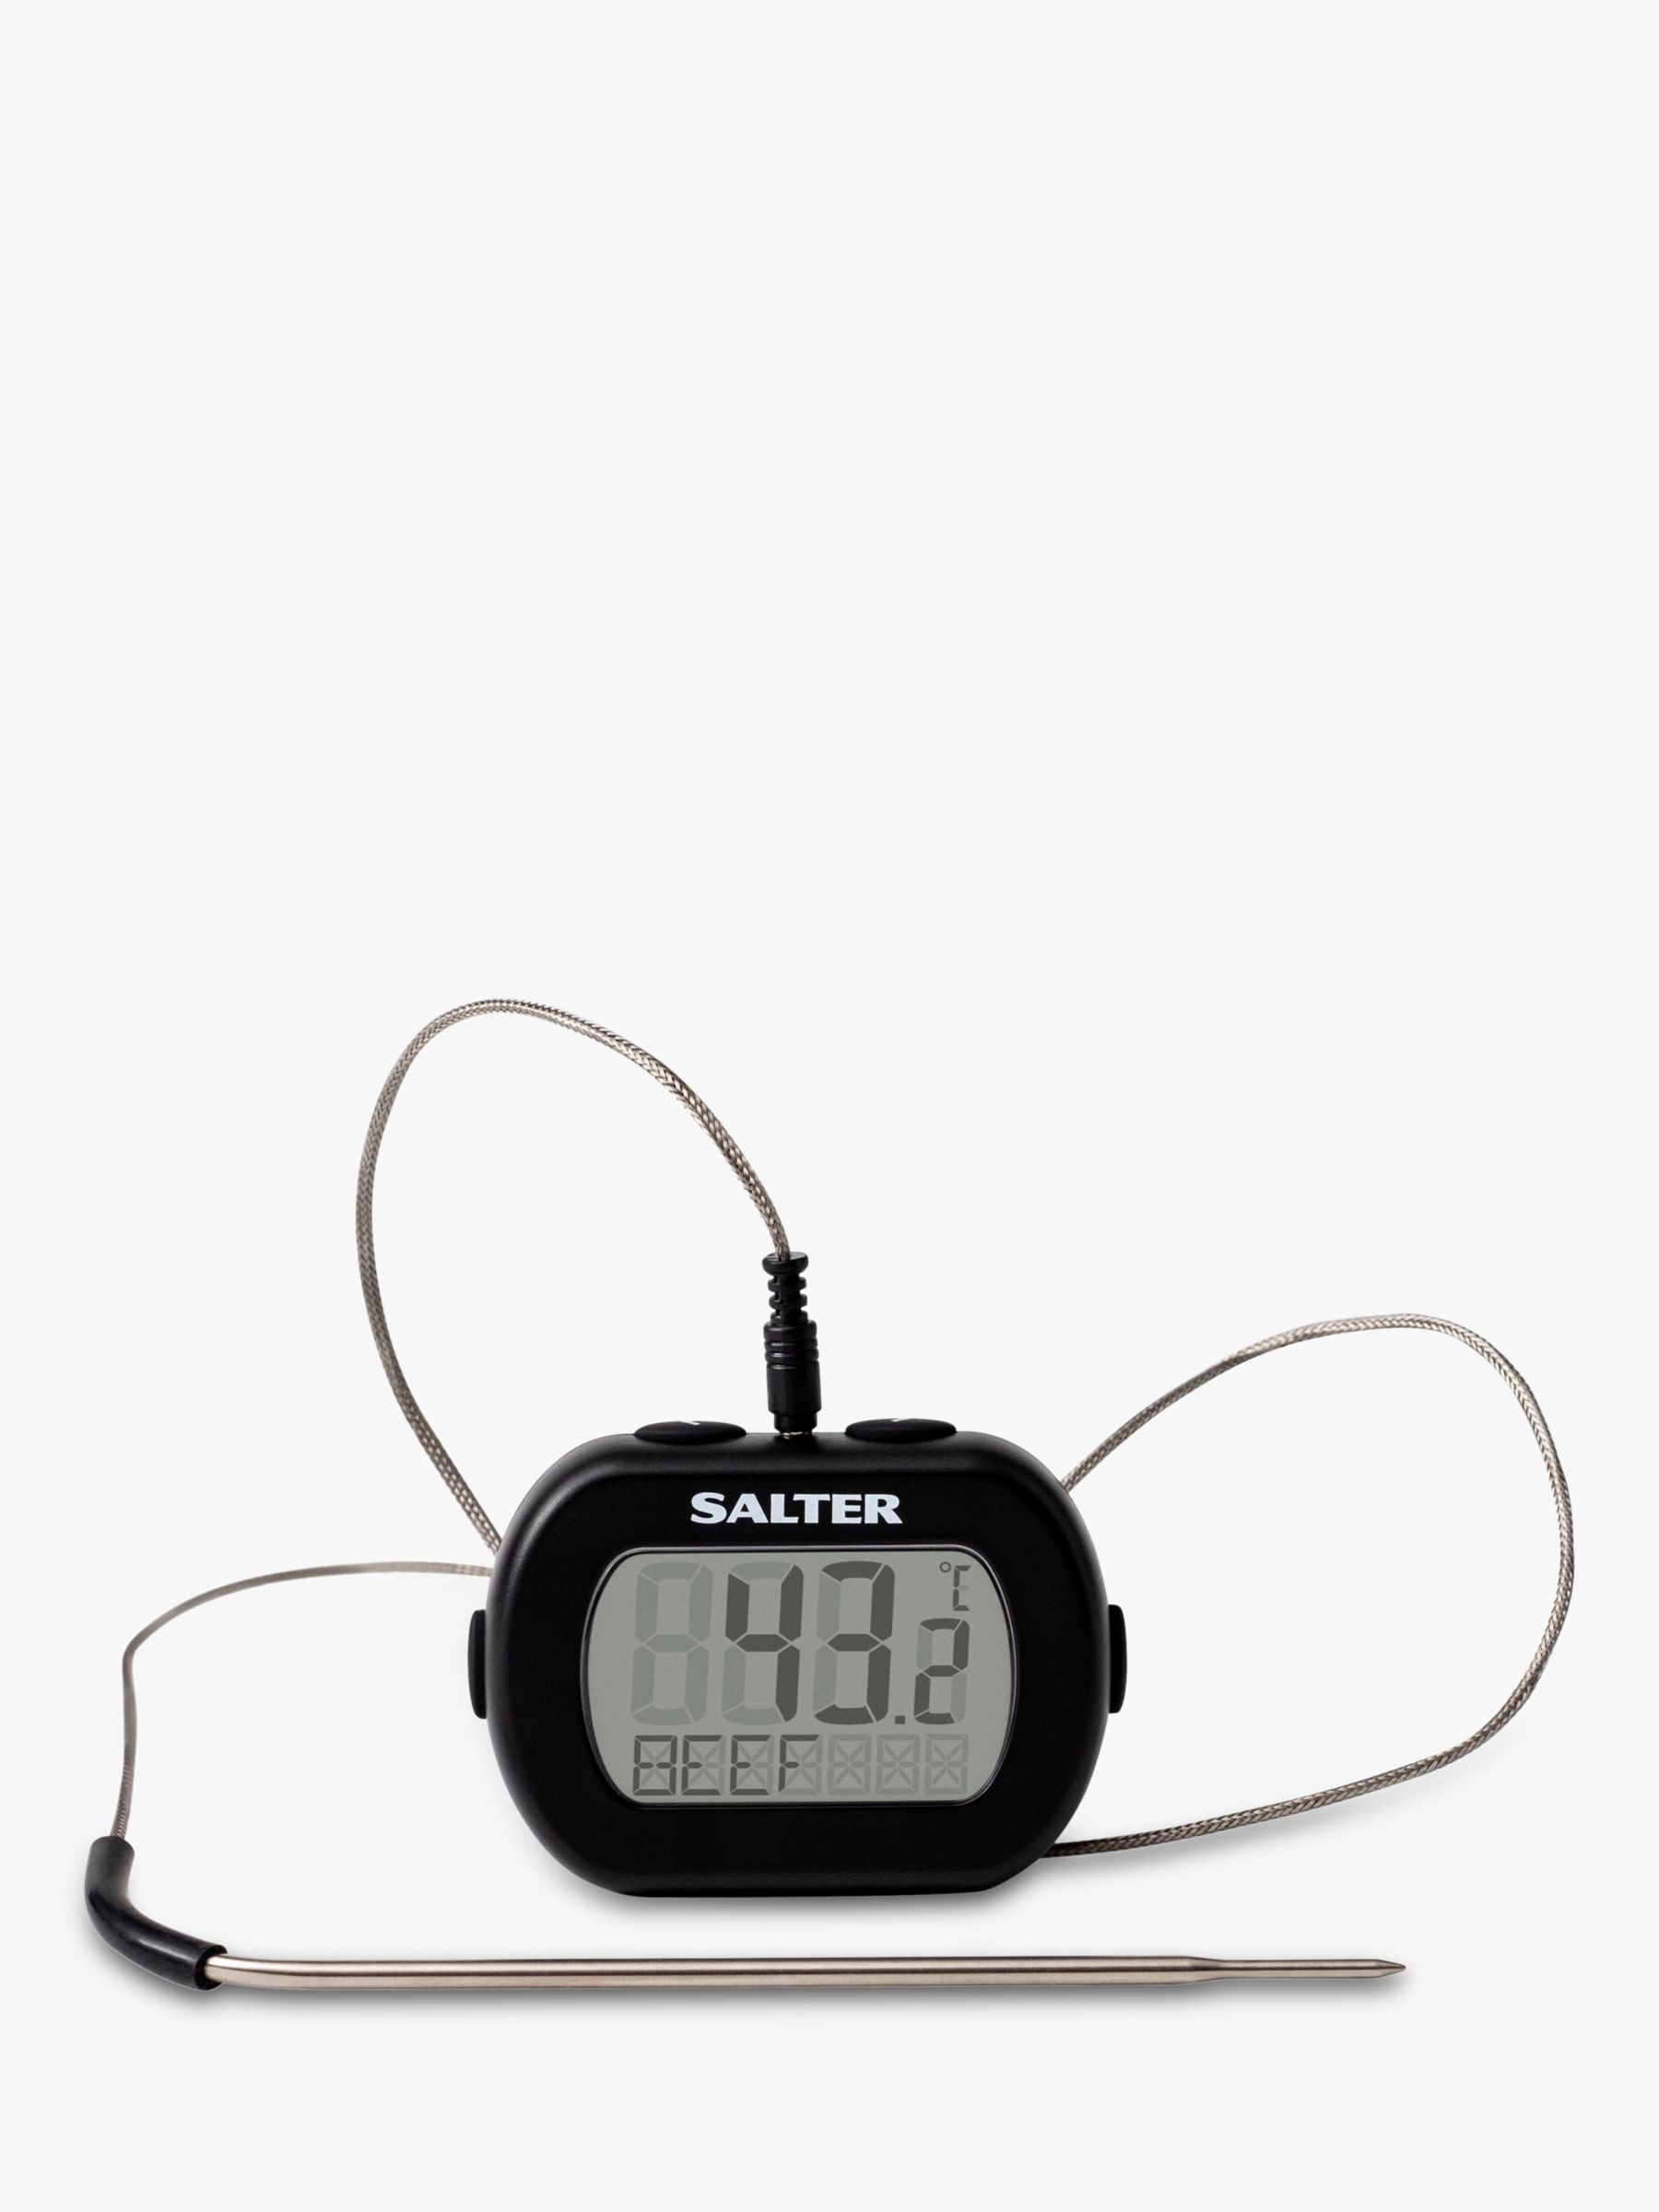 Salter 515 Leave-In Cooking Thermometer, £29.99